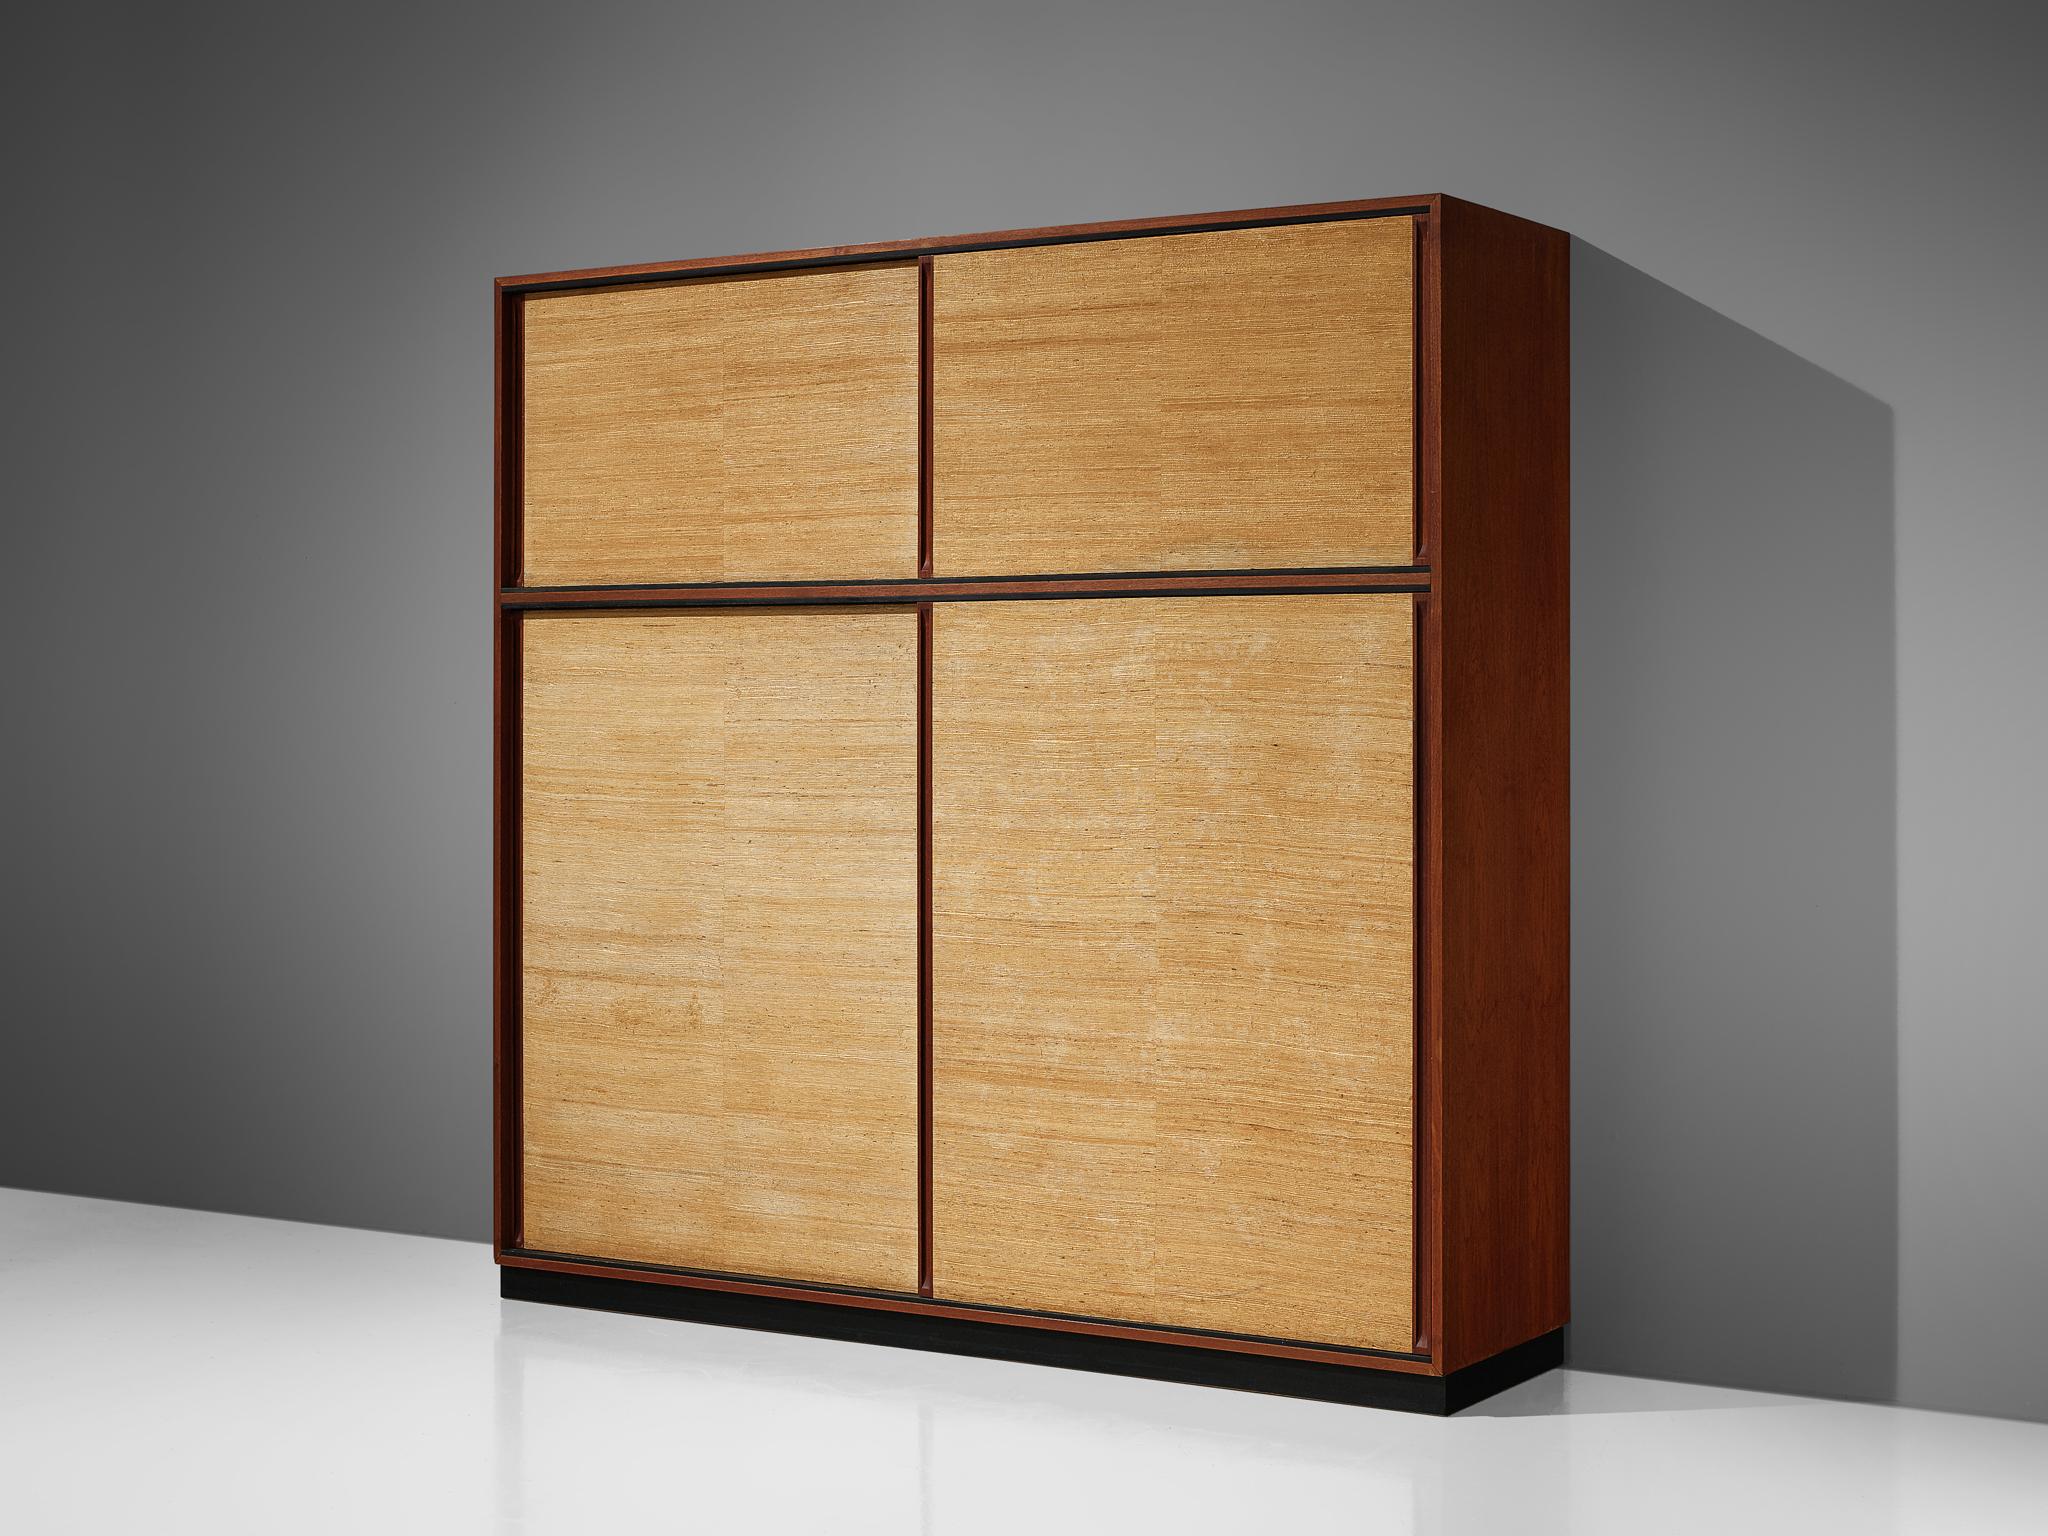 Dieter Waeckerlin, Behr Möbel, high board, teak, seagrass, Germany, 1950s

This rare and stunning large cabinet or wardrobe by Dieter Waeckerlin for Behr Möbel features a body made of teak with sliding doors covered in seagrass. While being